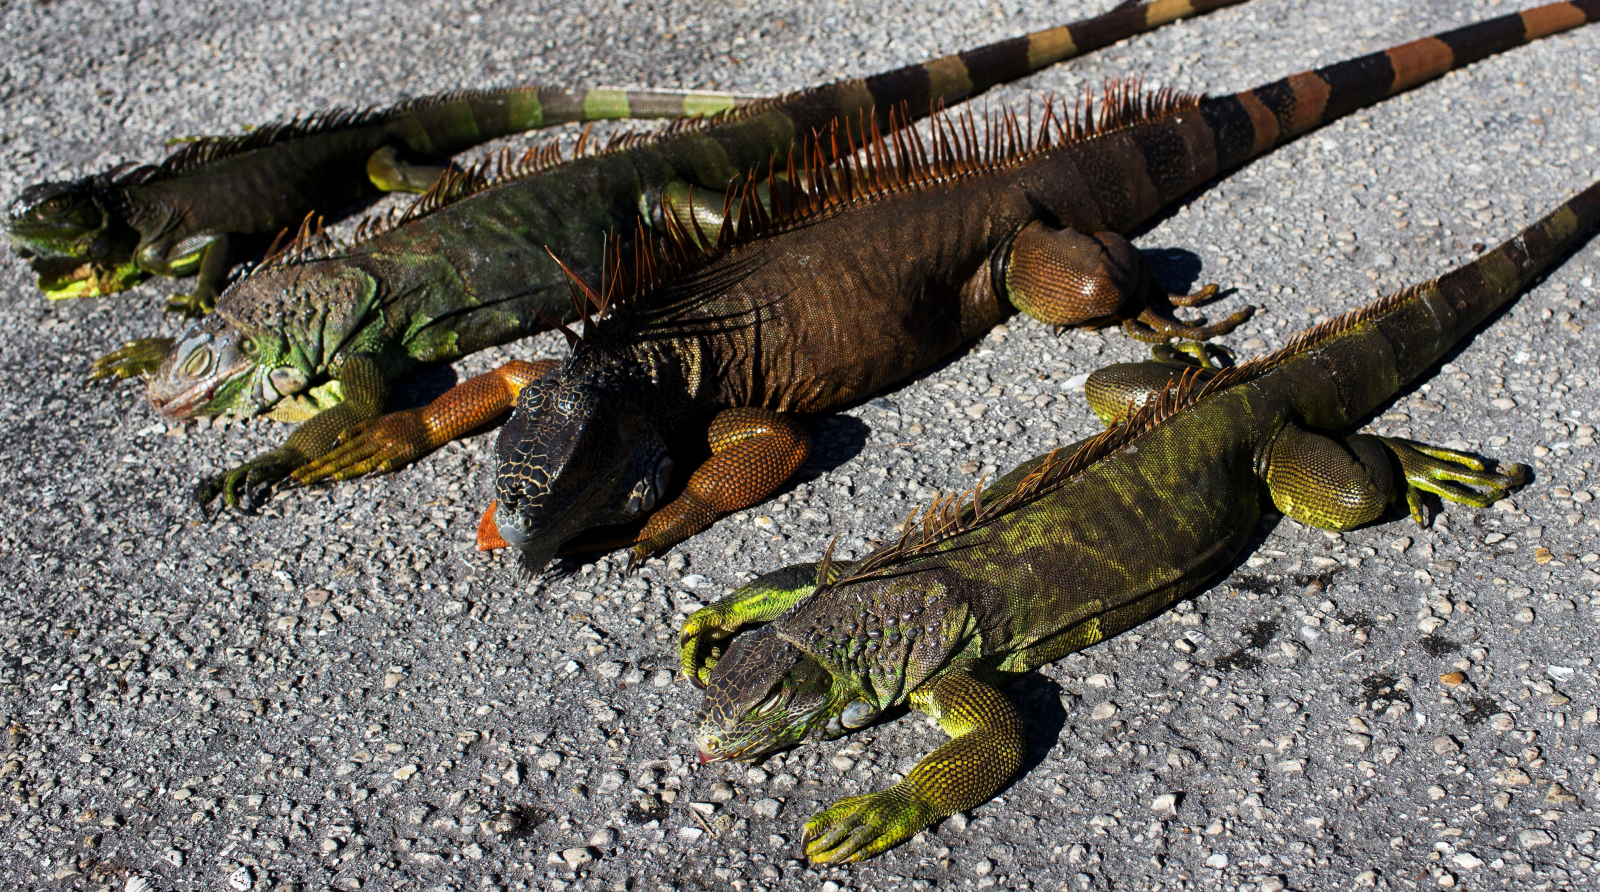 Frozen iguanas falling from trees in Florida due to extreme weather conditions1600 x 892